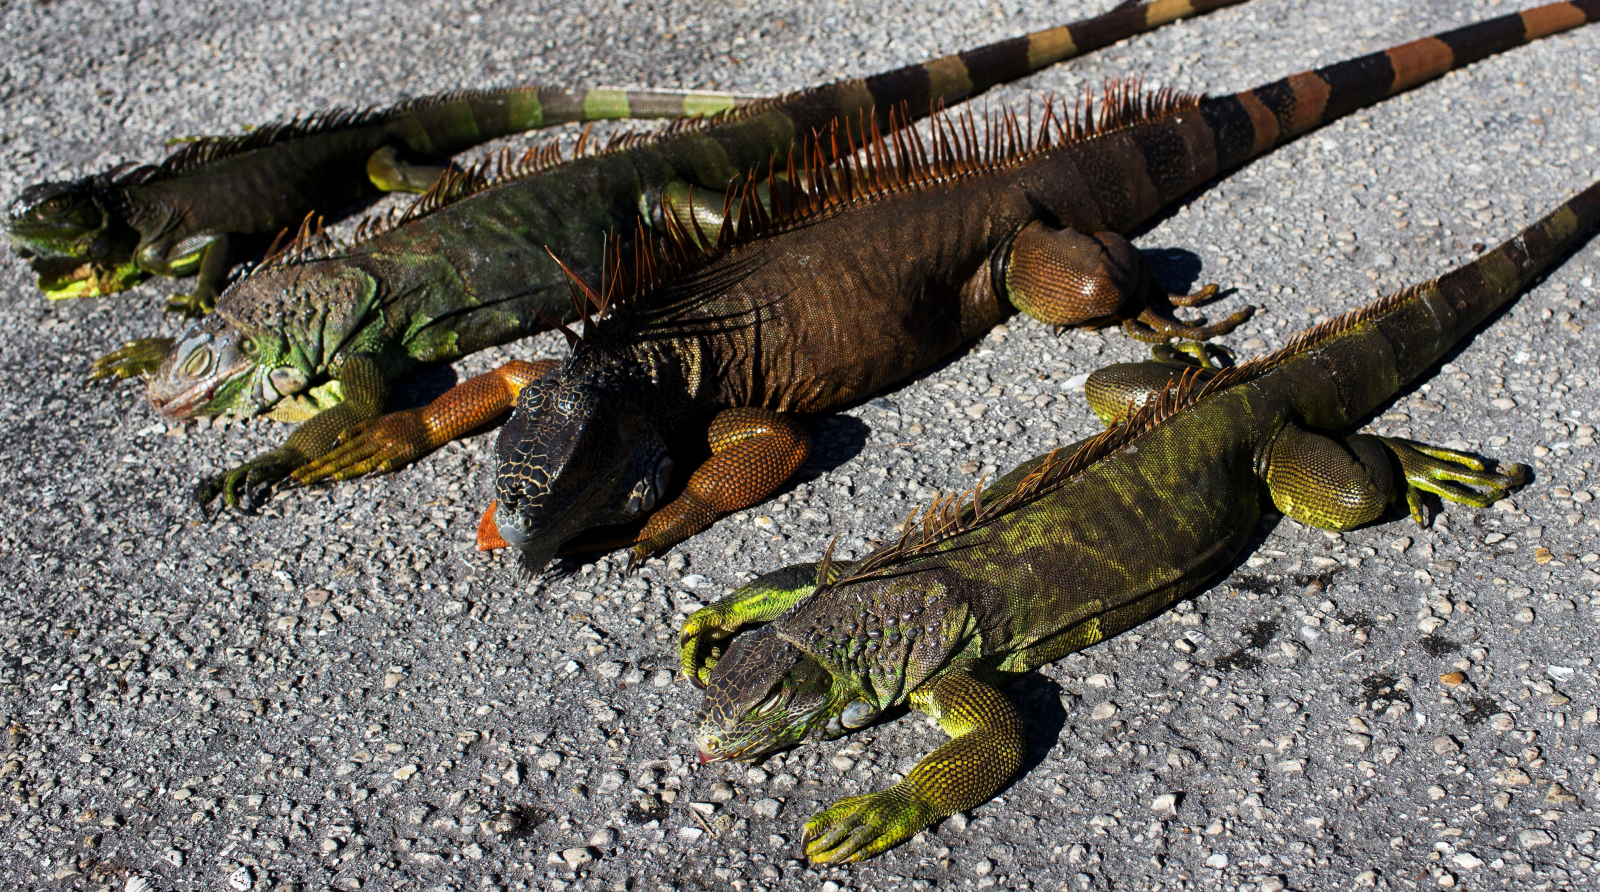 Frozen iguanas falling from trees in Florida due to extreme weather conditions1600 x 892